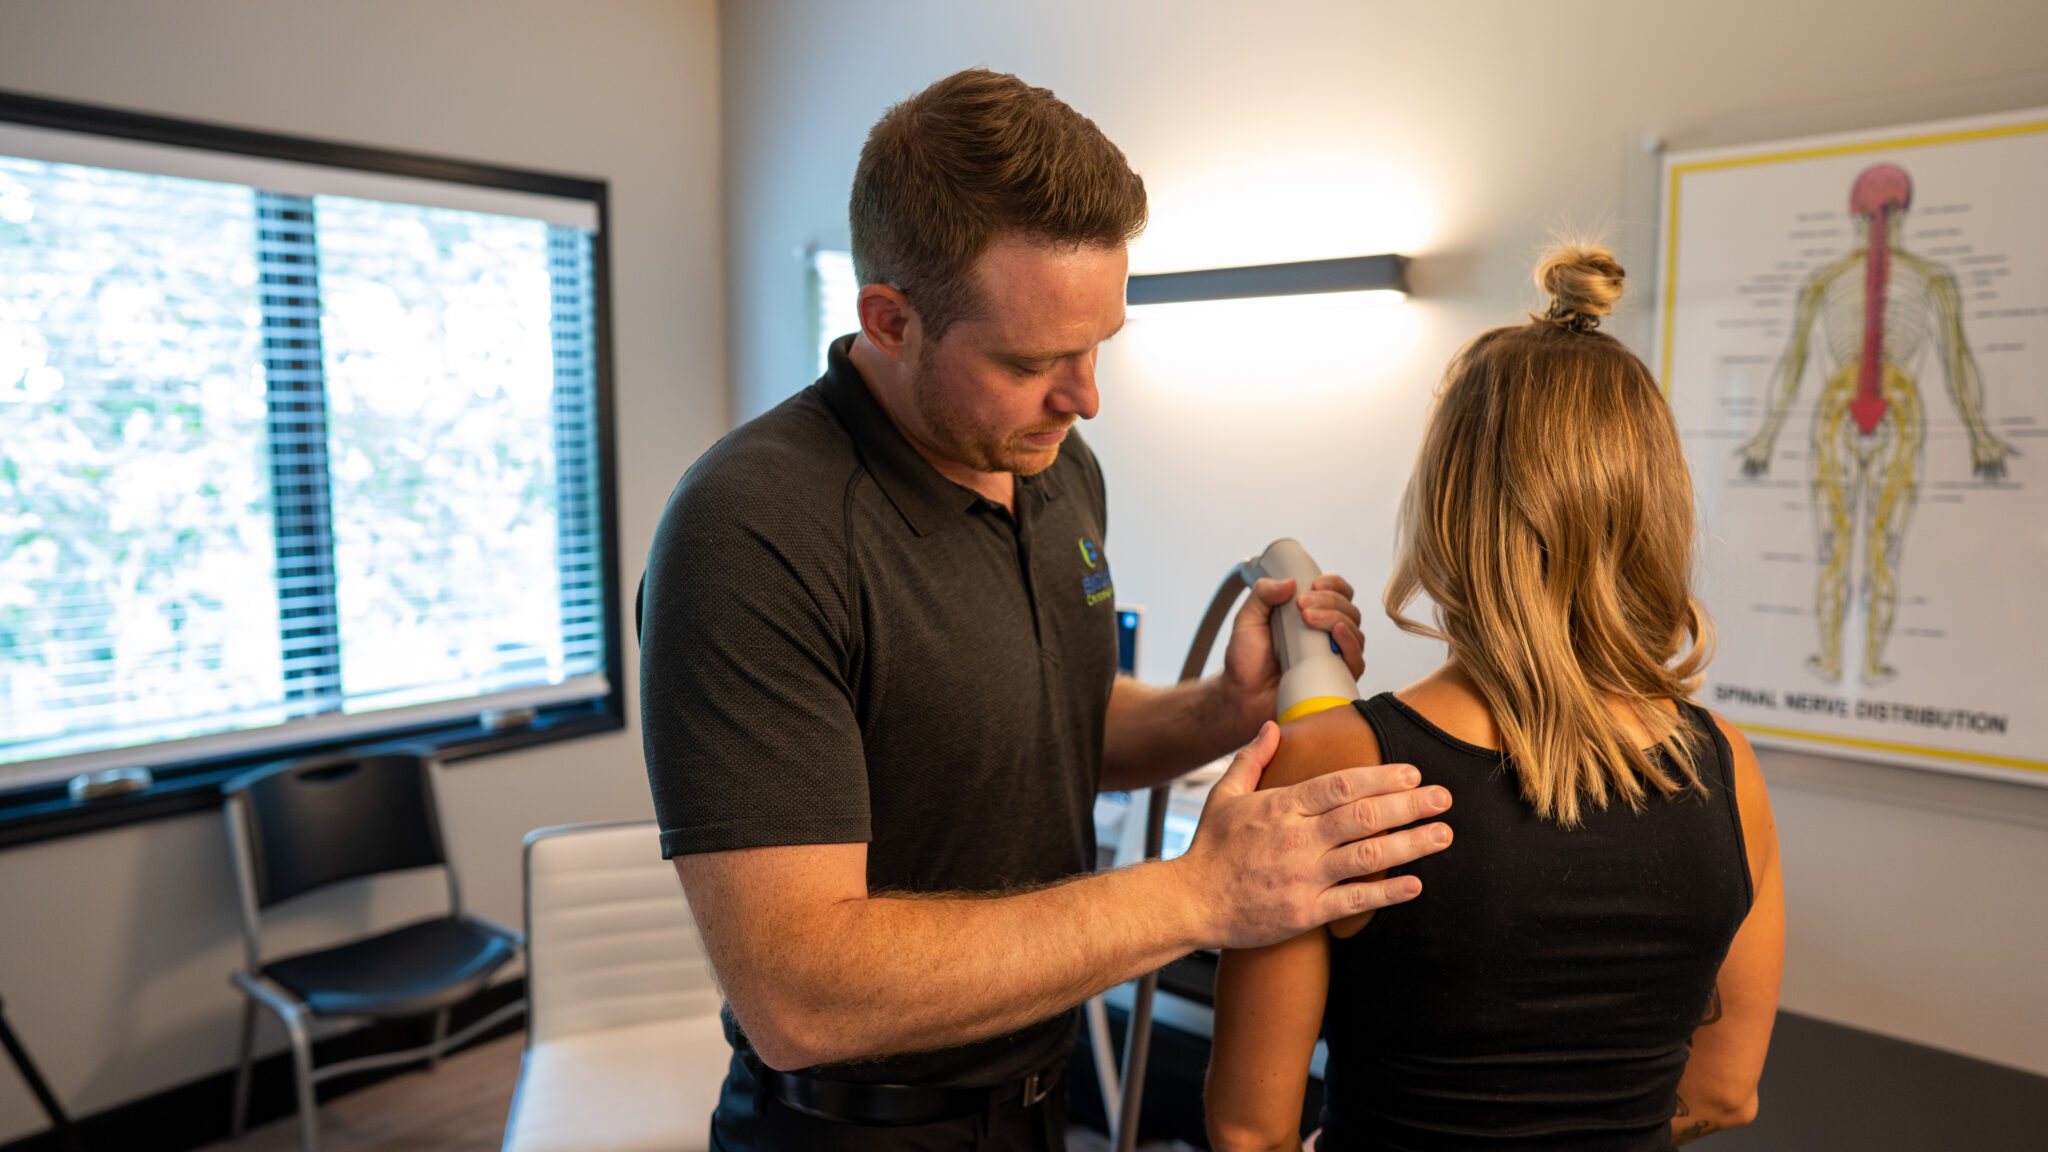 Chiropractic Service Expands Reach, Bringing Holistic Health Solutions